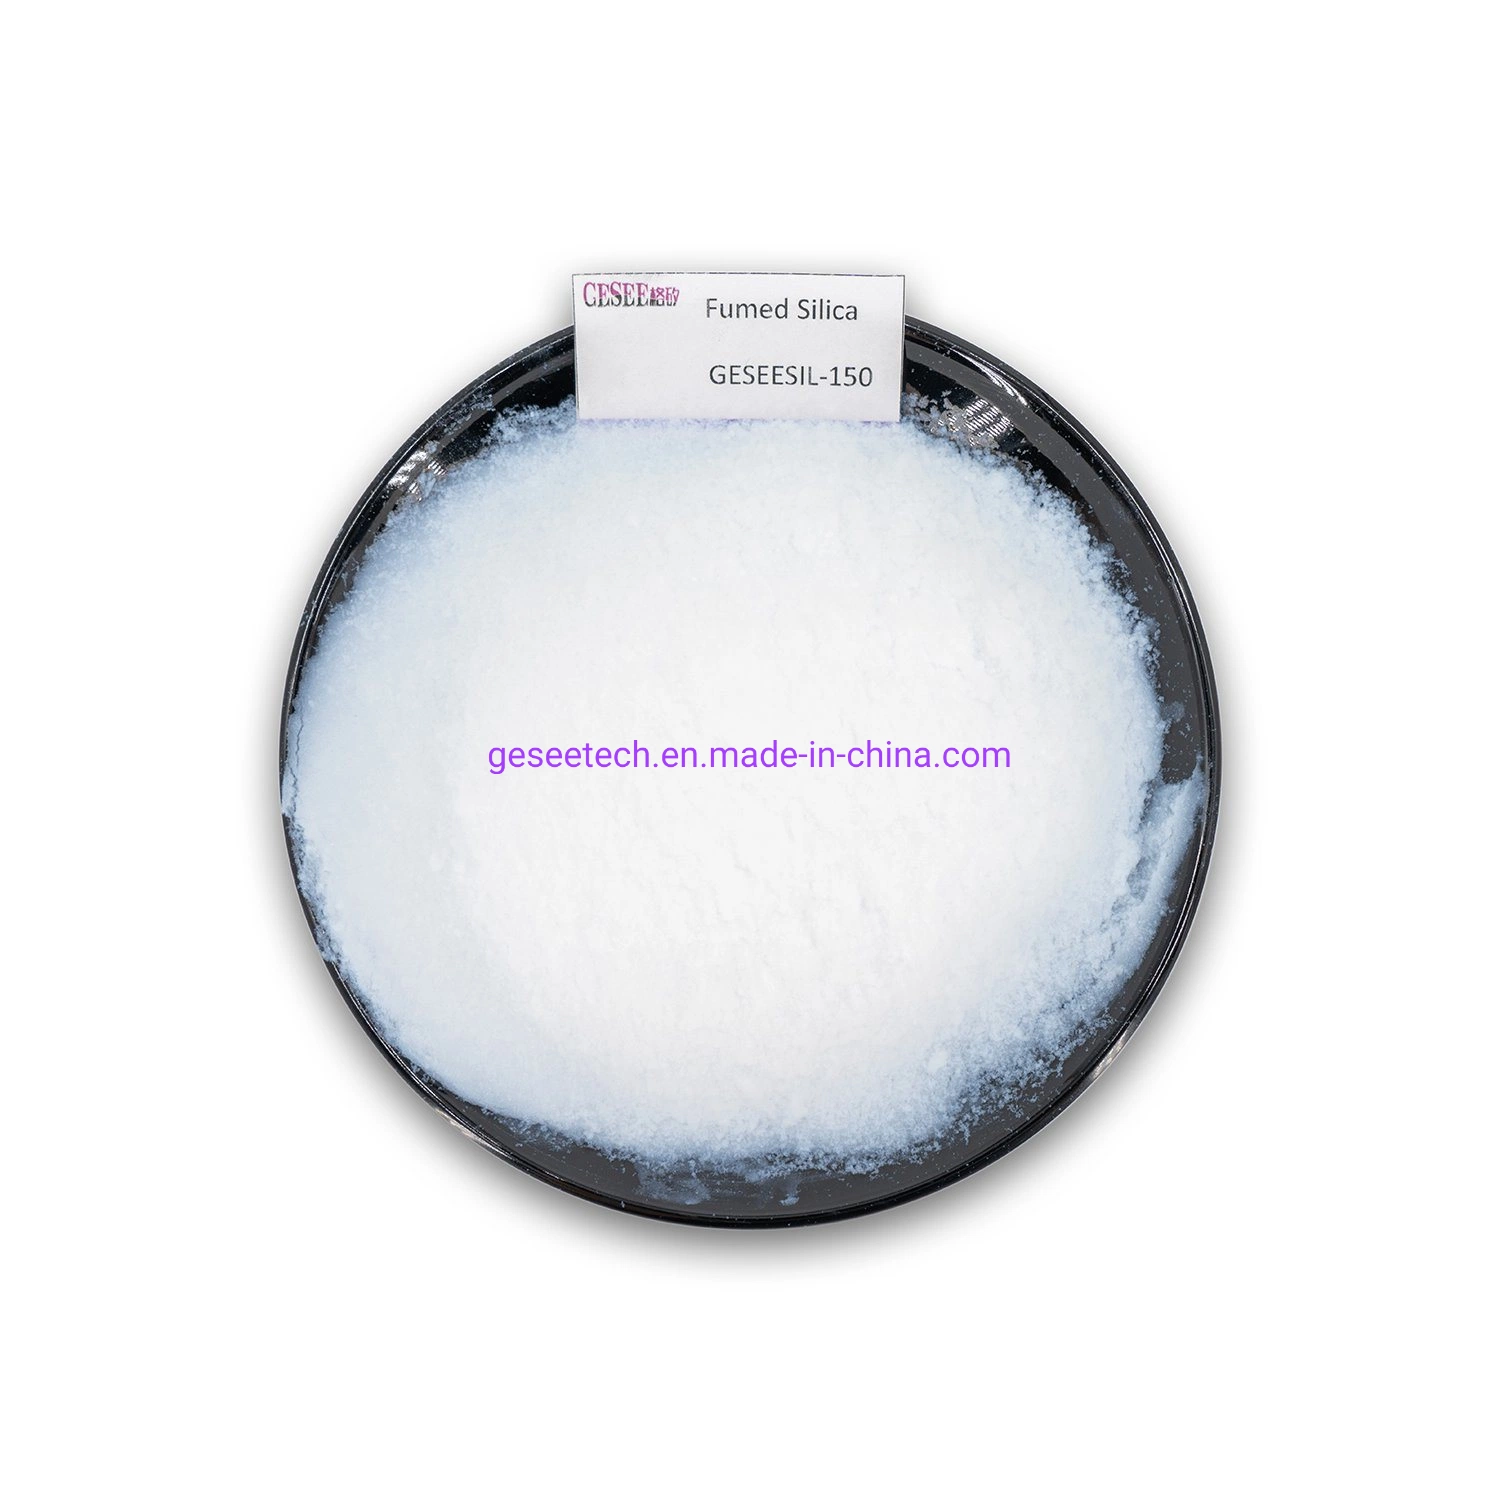 99.9% High Purity White Quartz Crystal Powder/Silicon Dioxide/Fumed Silica for High Temperature Material